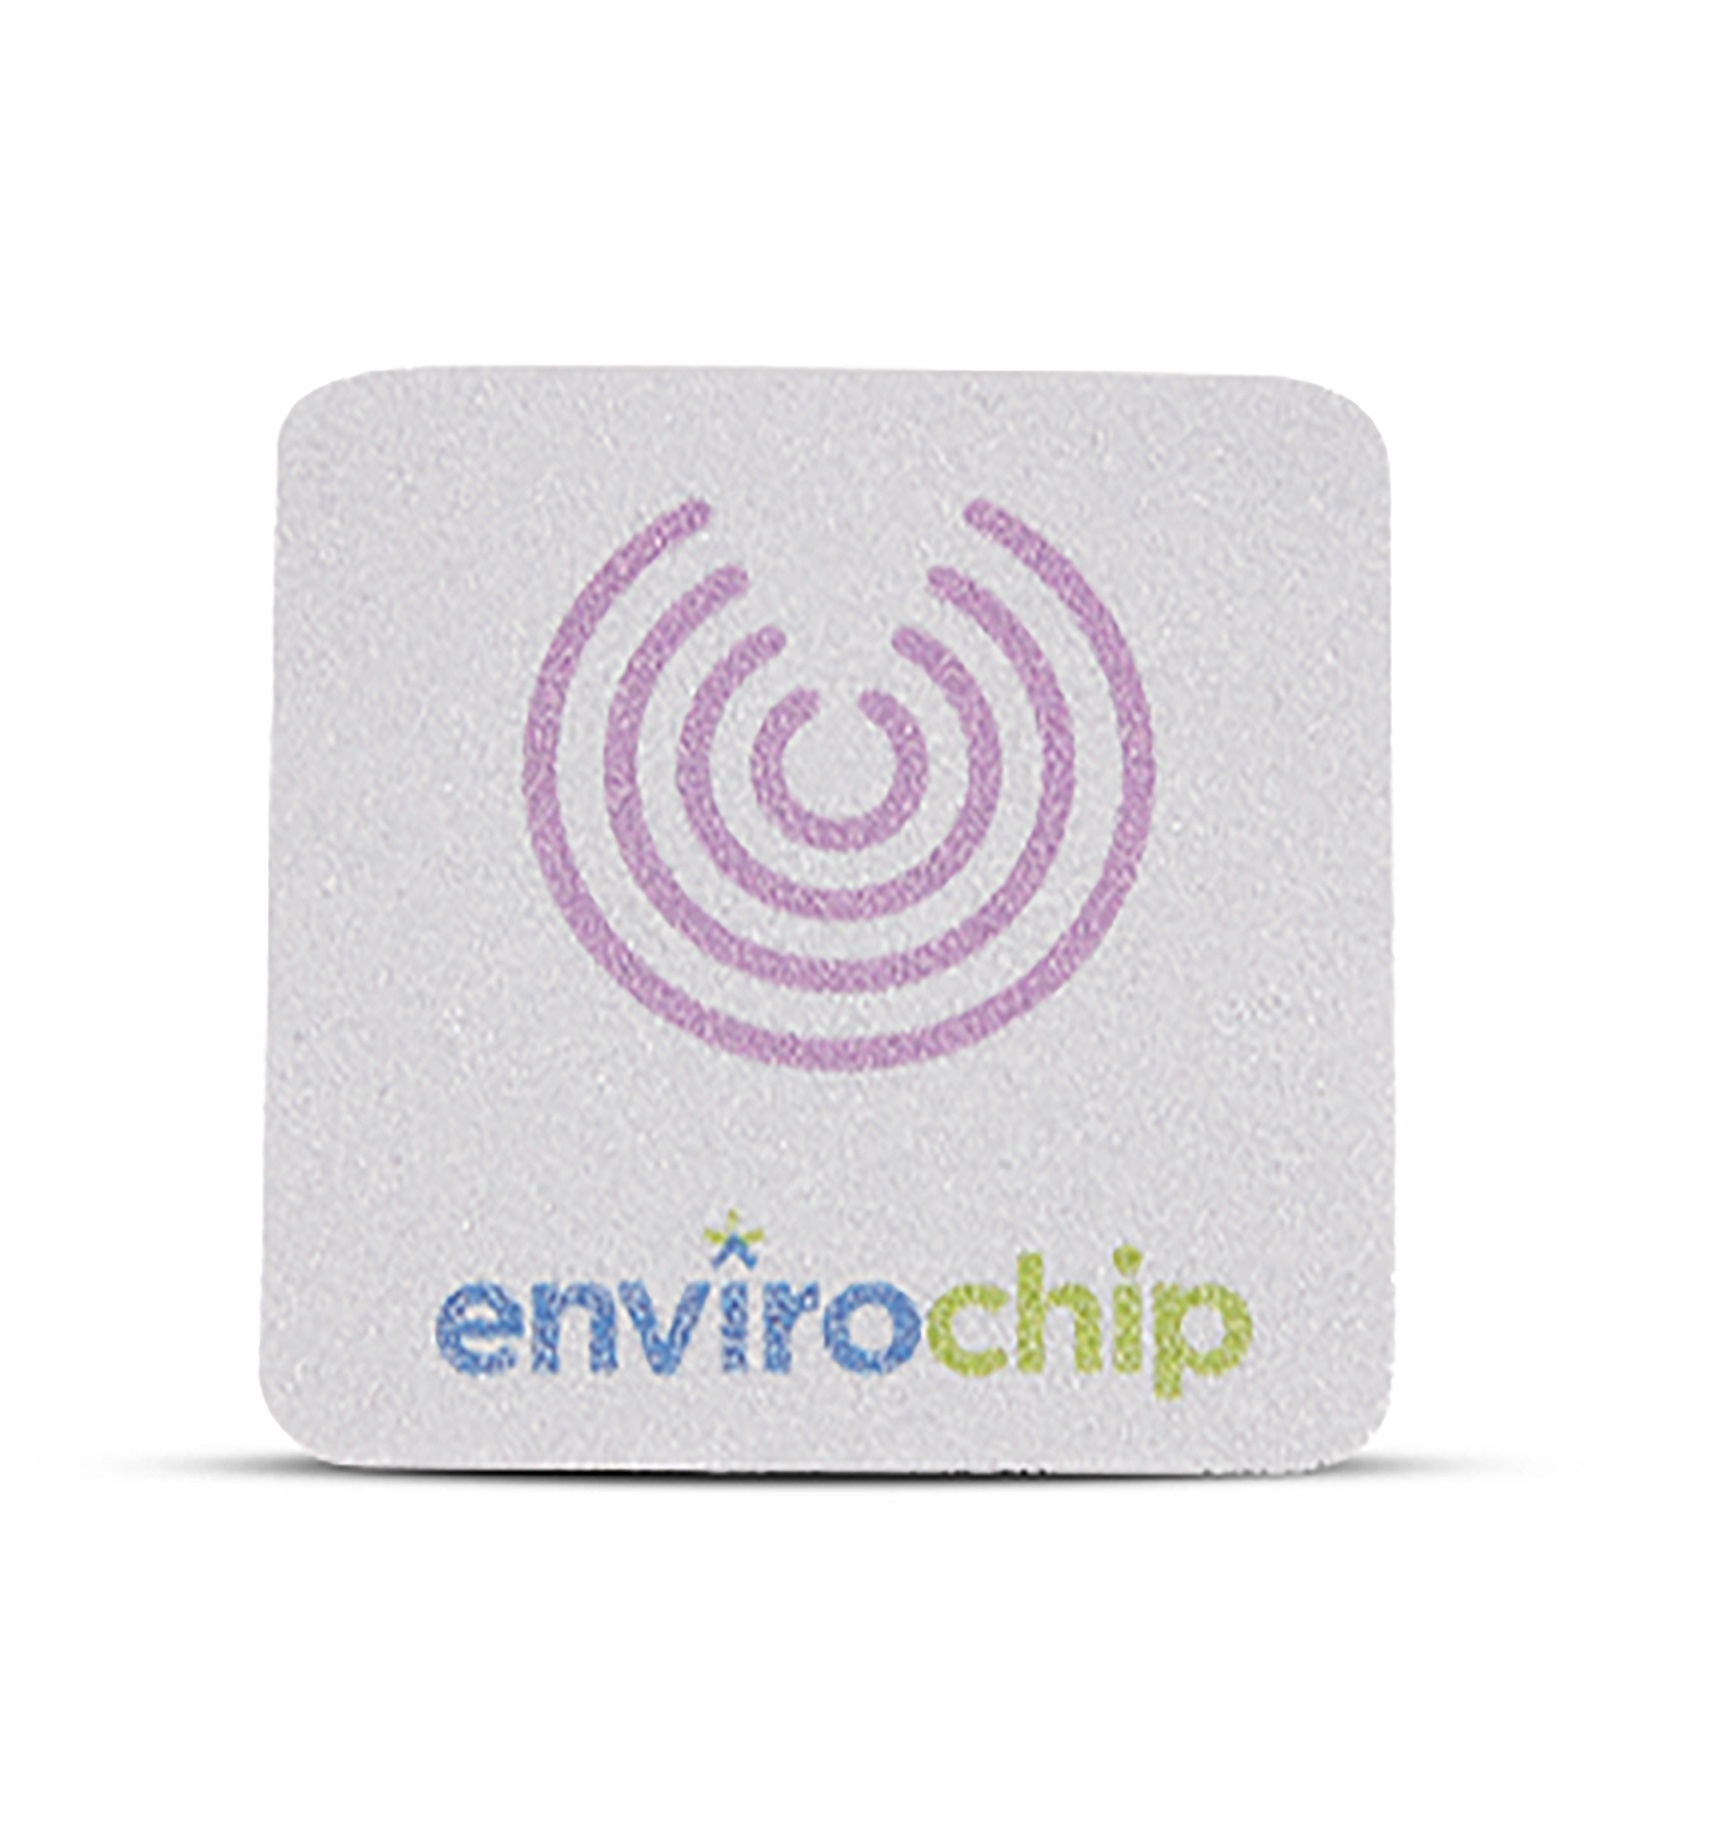 envirochip-clinically-tested-patented-anti-radiation-chip-for-tablet-wi-fi-pc-monitor-elements-design-ether-silver